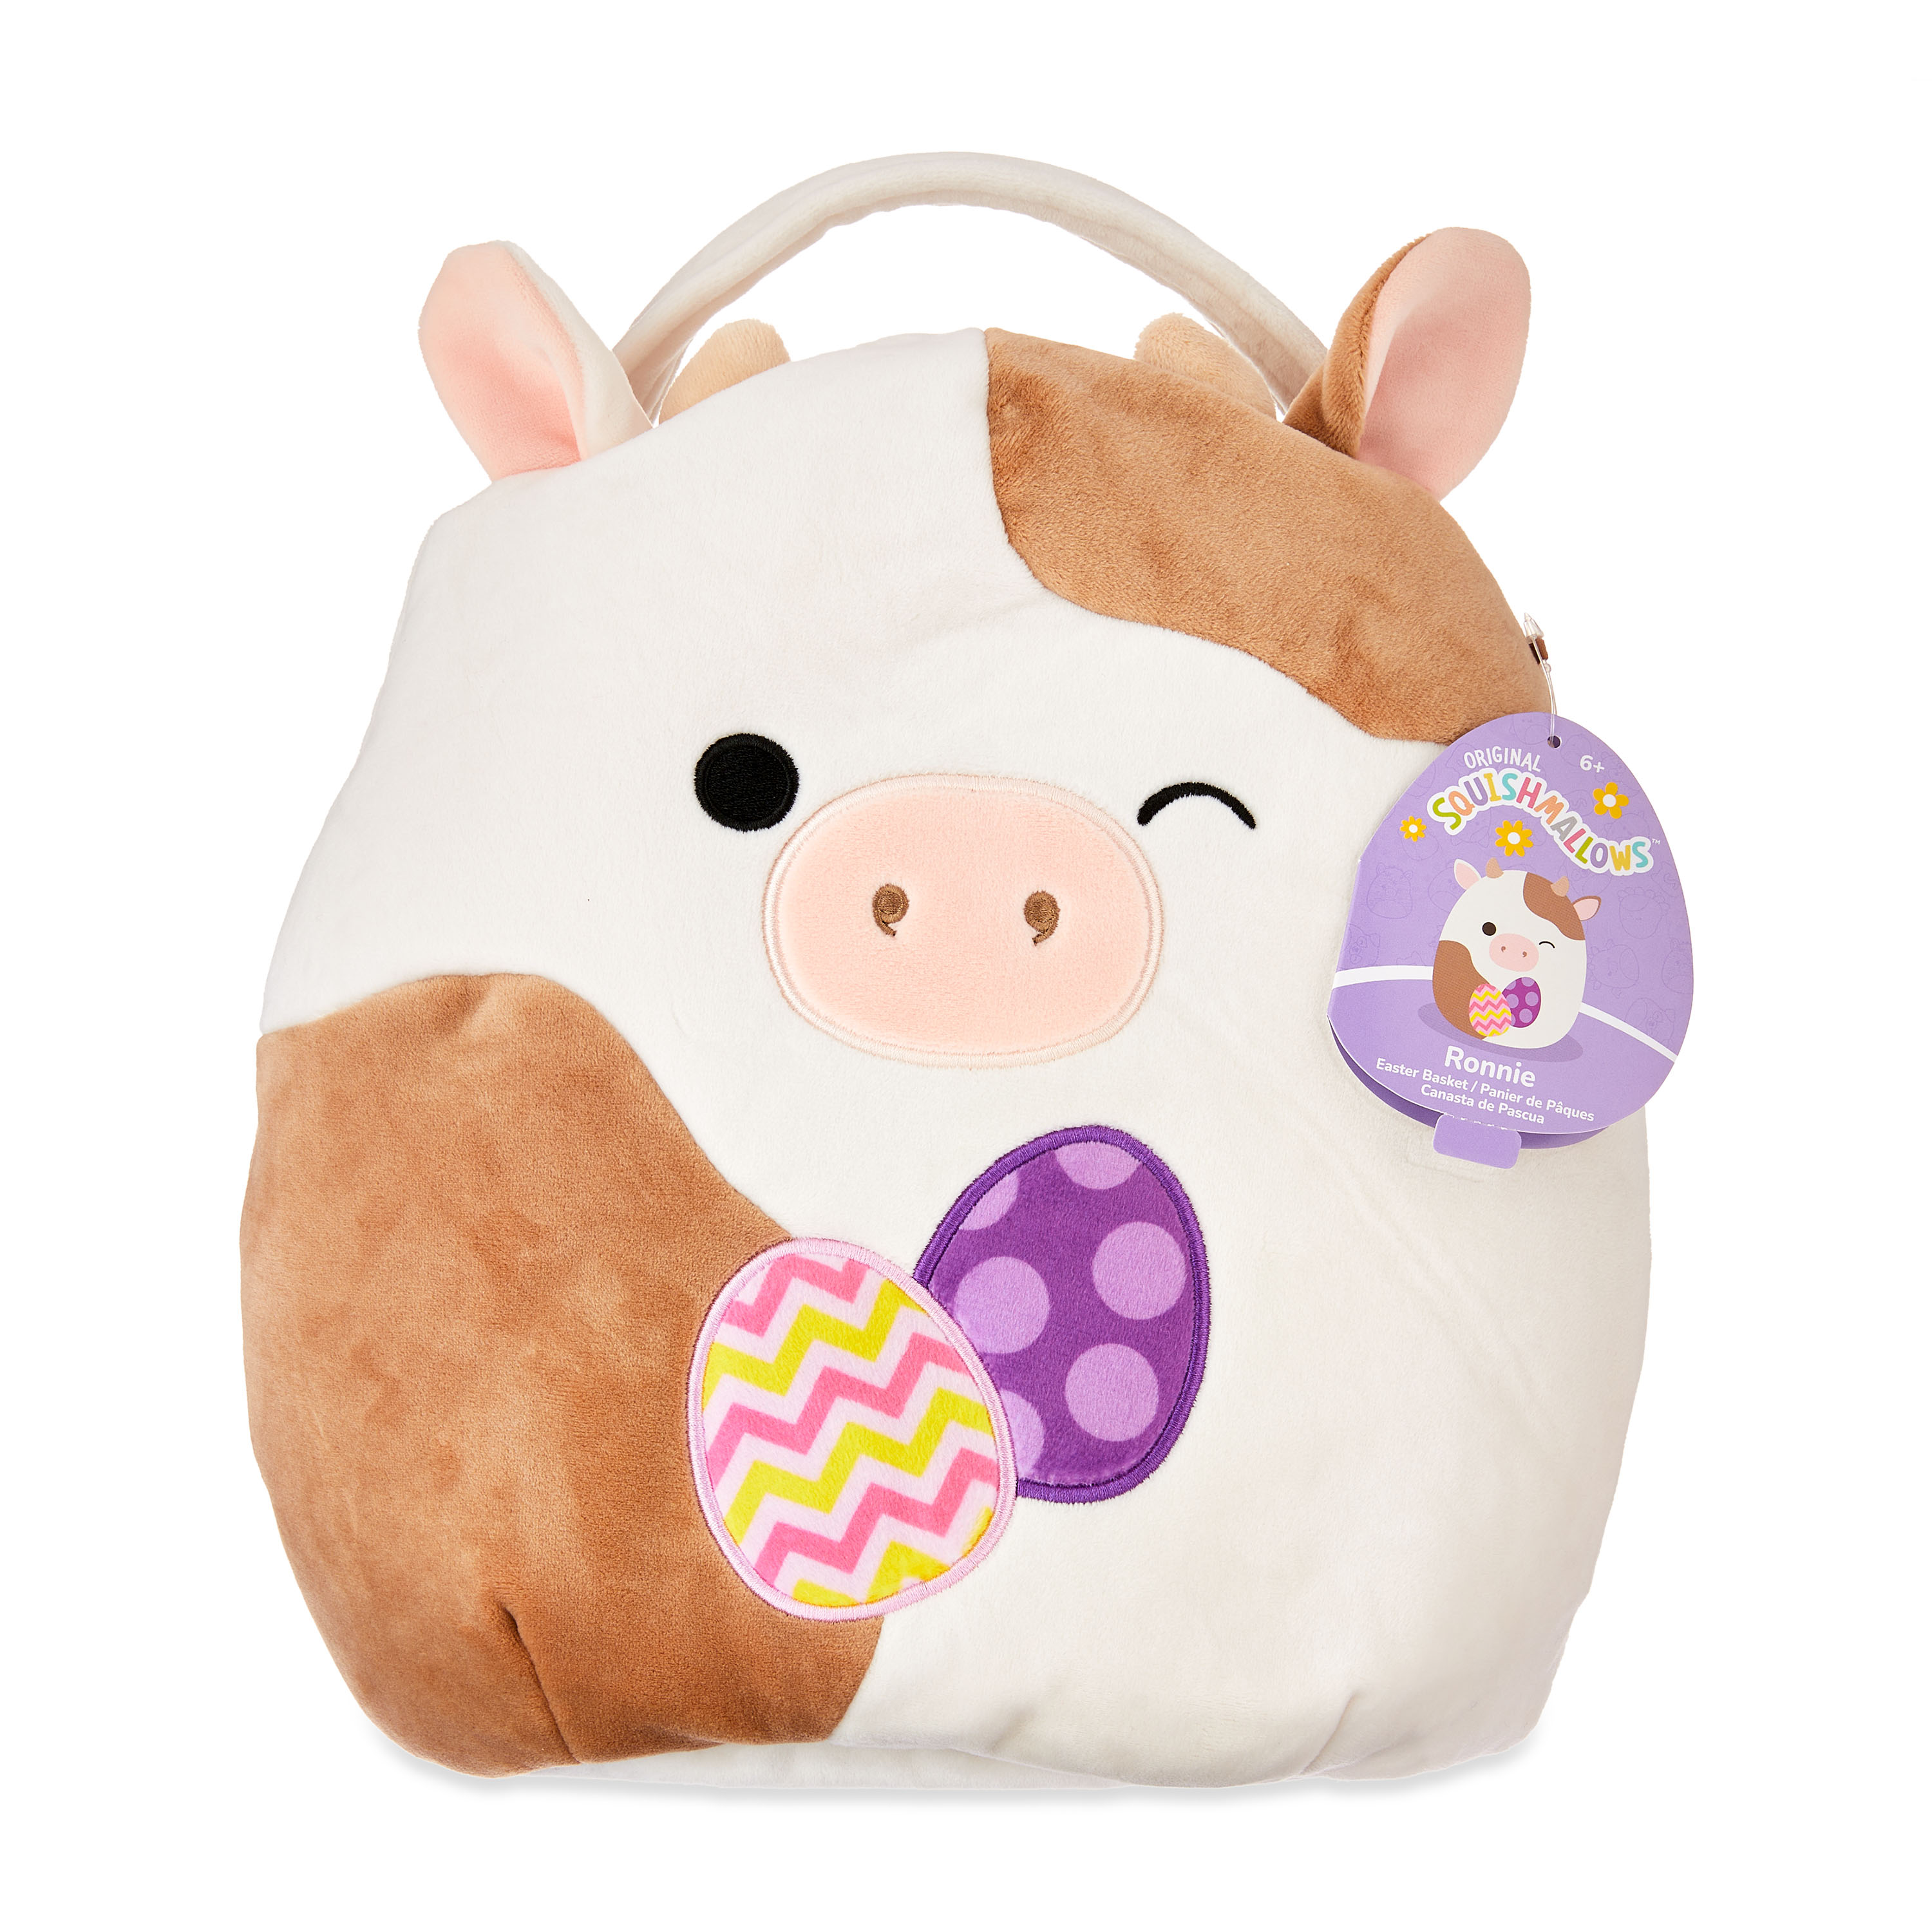 Squishmallows 12" Cow Treat Pail - Ronnie, The Stuffed Animal Plush - image 3 of 5